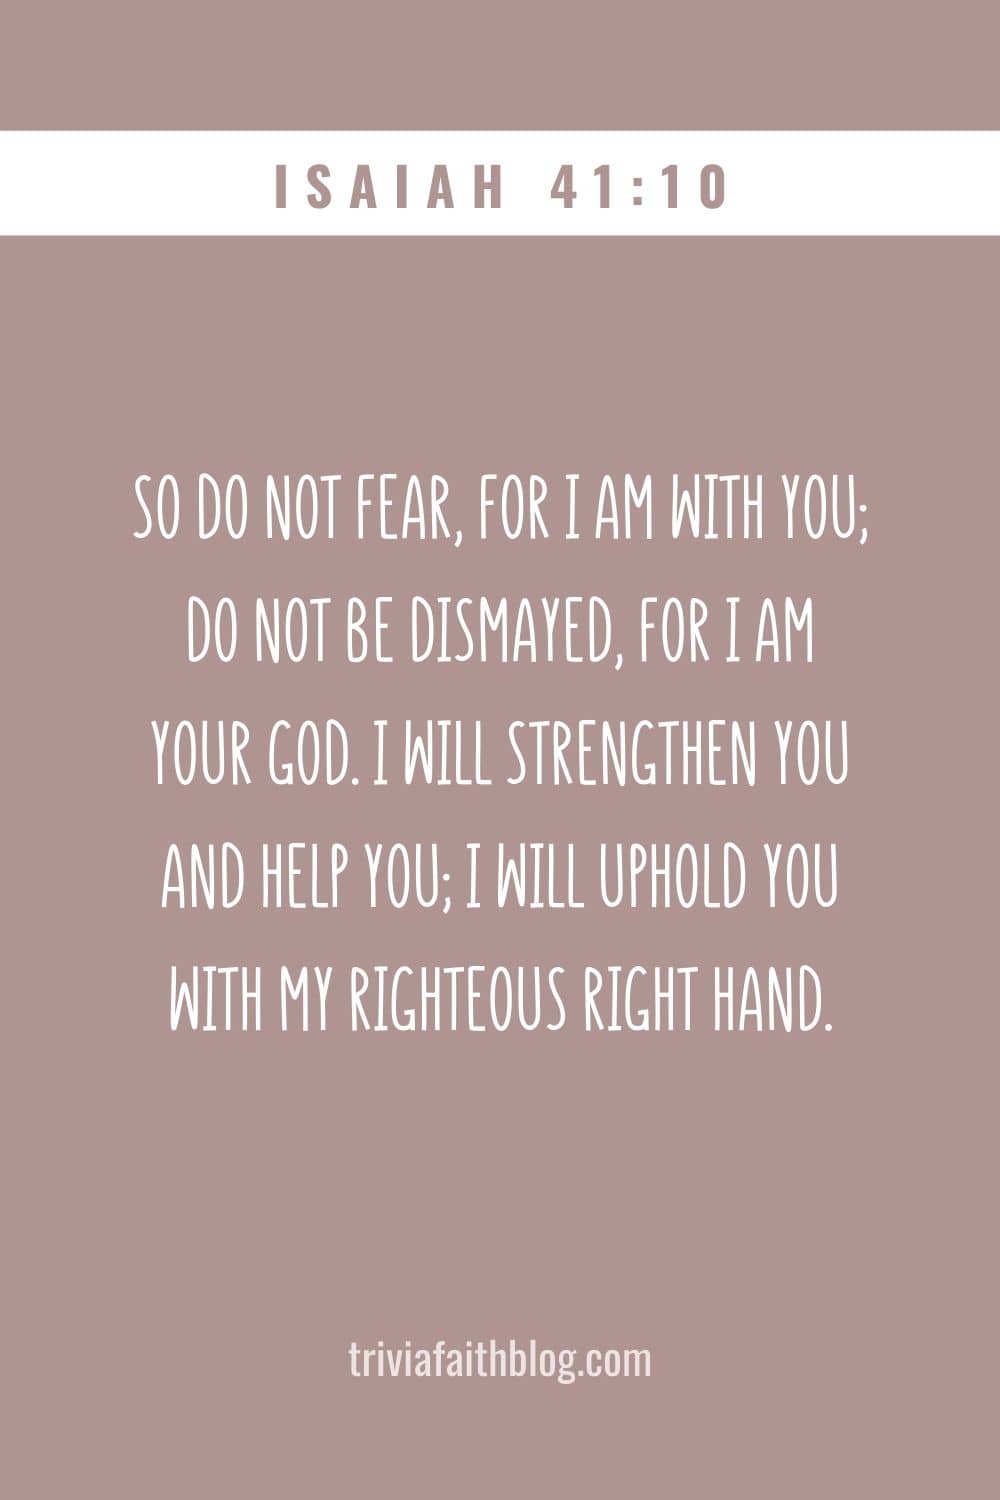 So do not fear, for I am with you; do not be dismayed, for I am your God. I will strengthen you and help you; I will uphold you with my righteous right hand